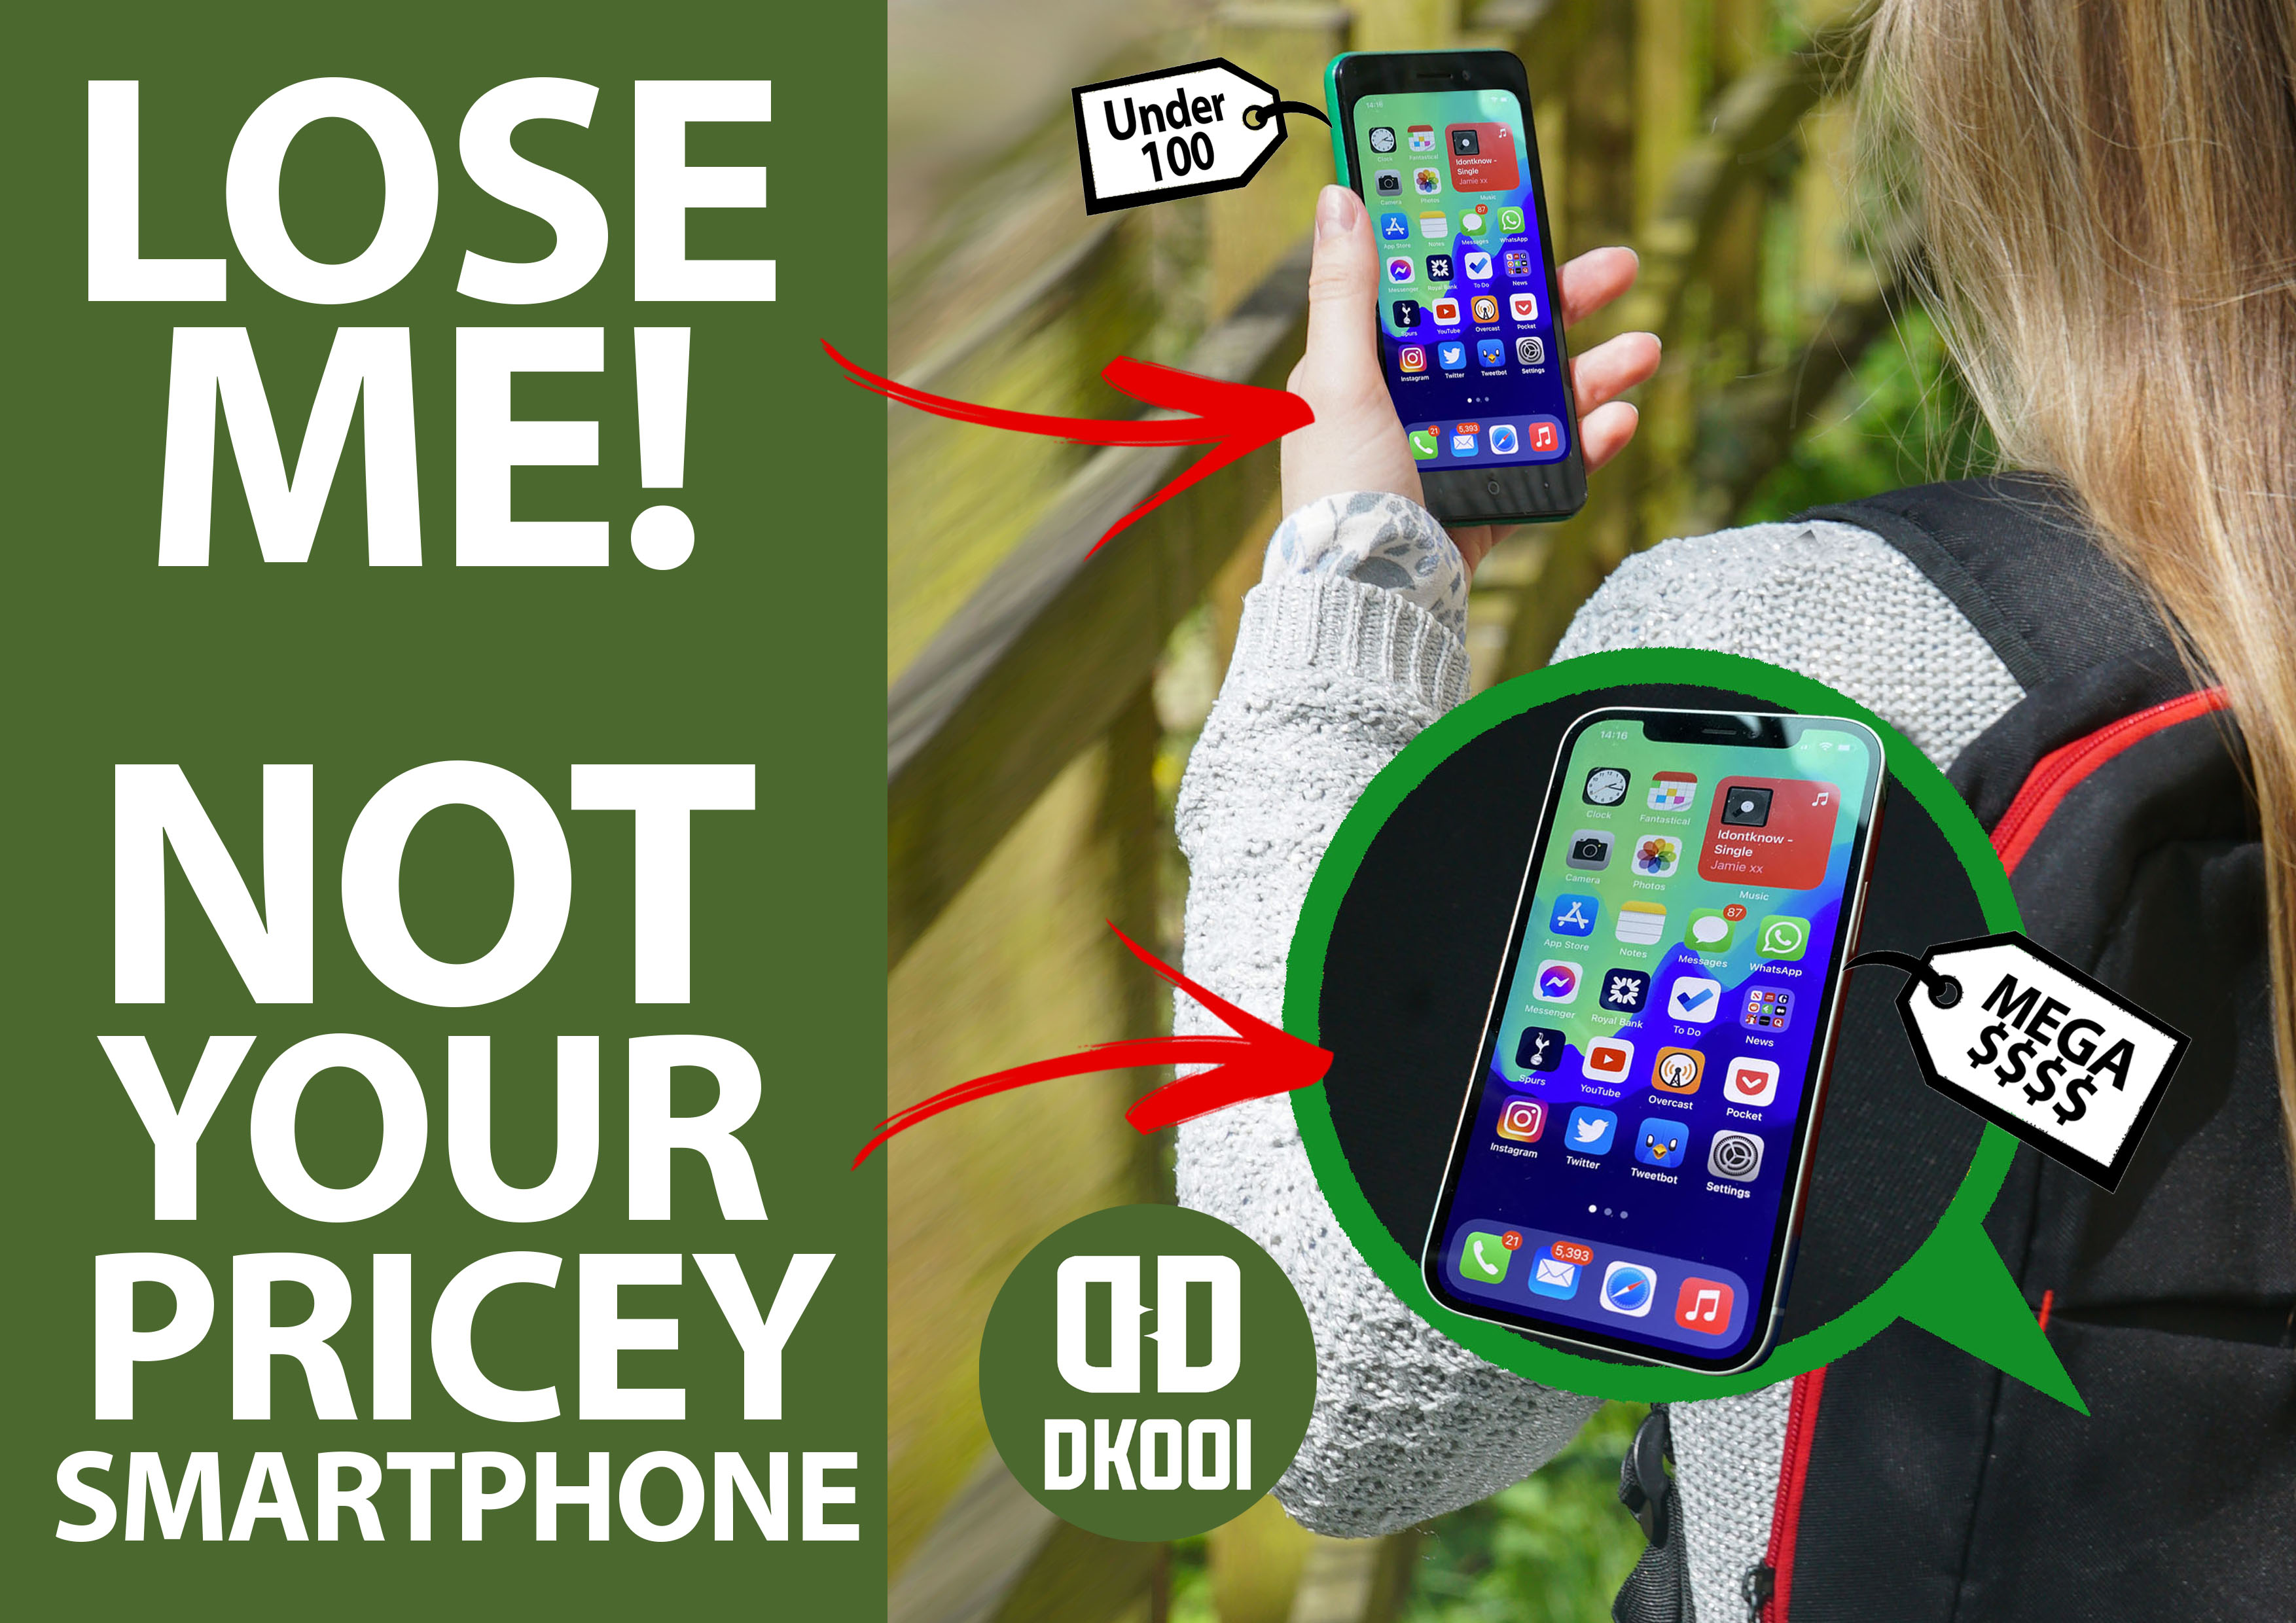 Innovative smartphone mirroring device Dkooi Set To Launch On Indiegogo